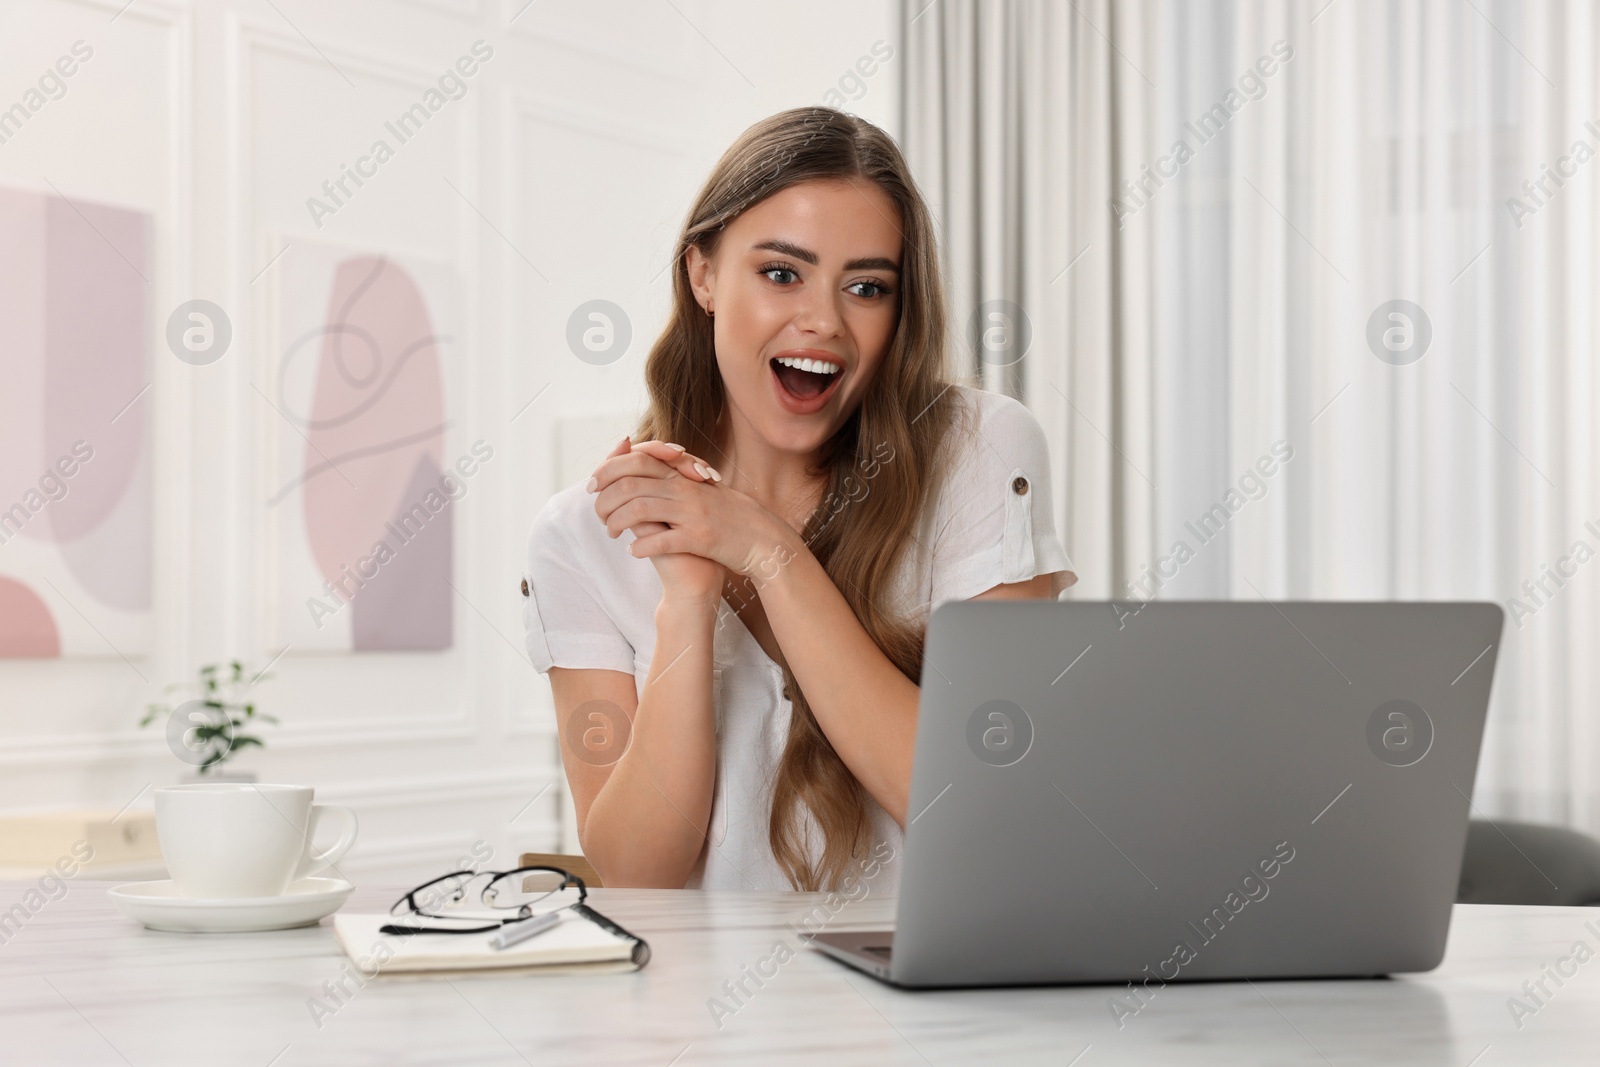 Photo of Surprised woman using laptop at white table in room